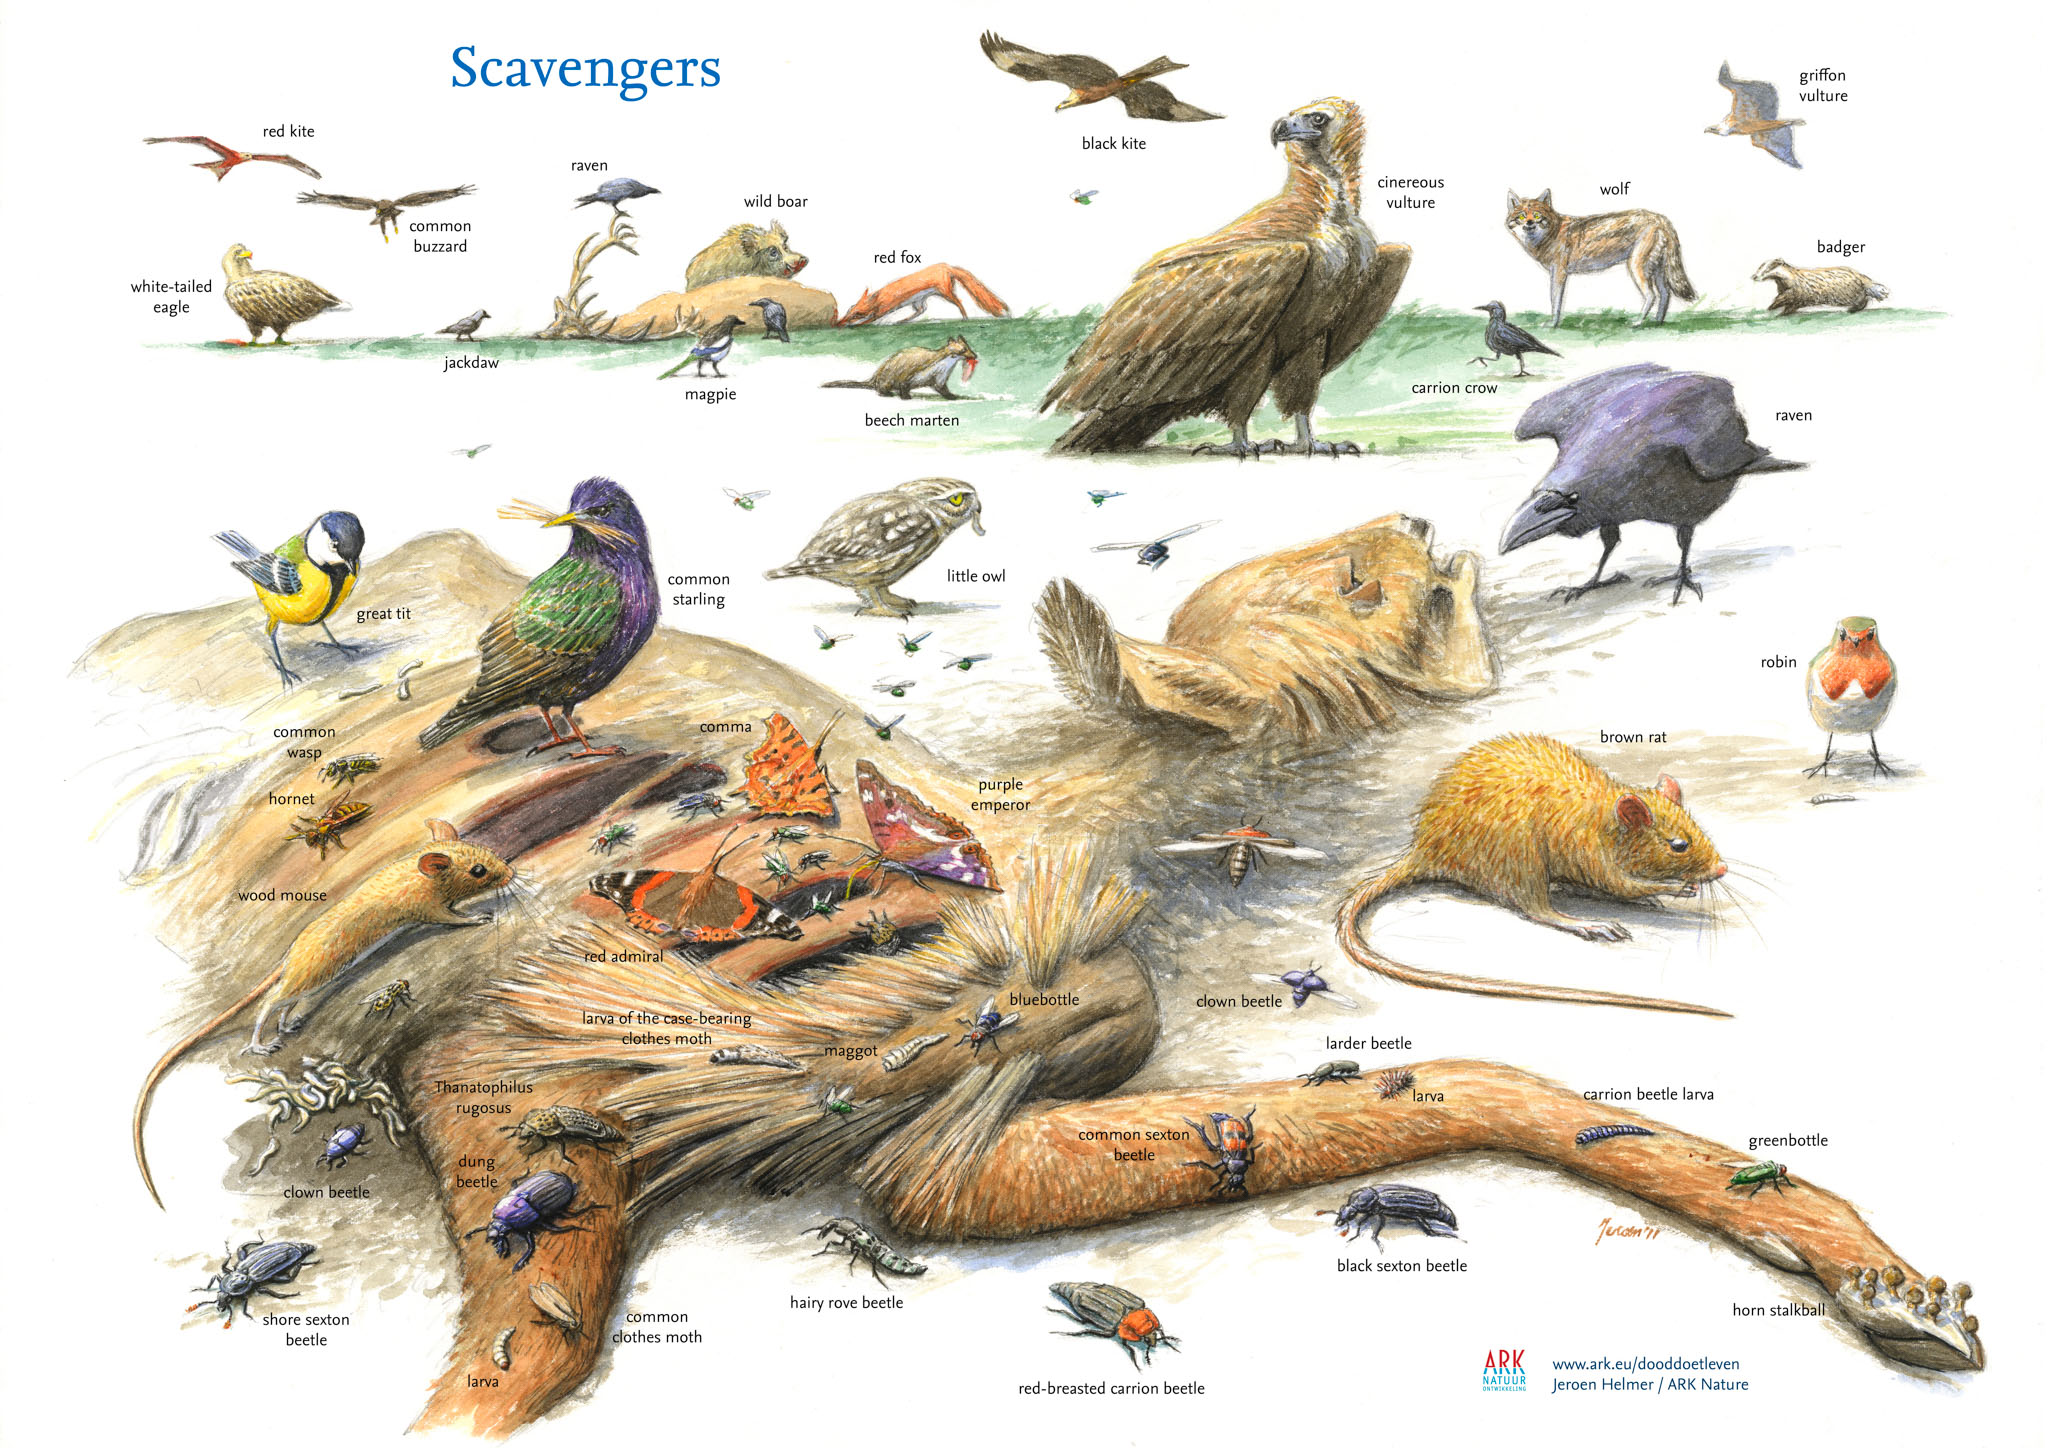 The Circle of Life project: supporting Europe's scavengers | Rewilding  Europe